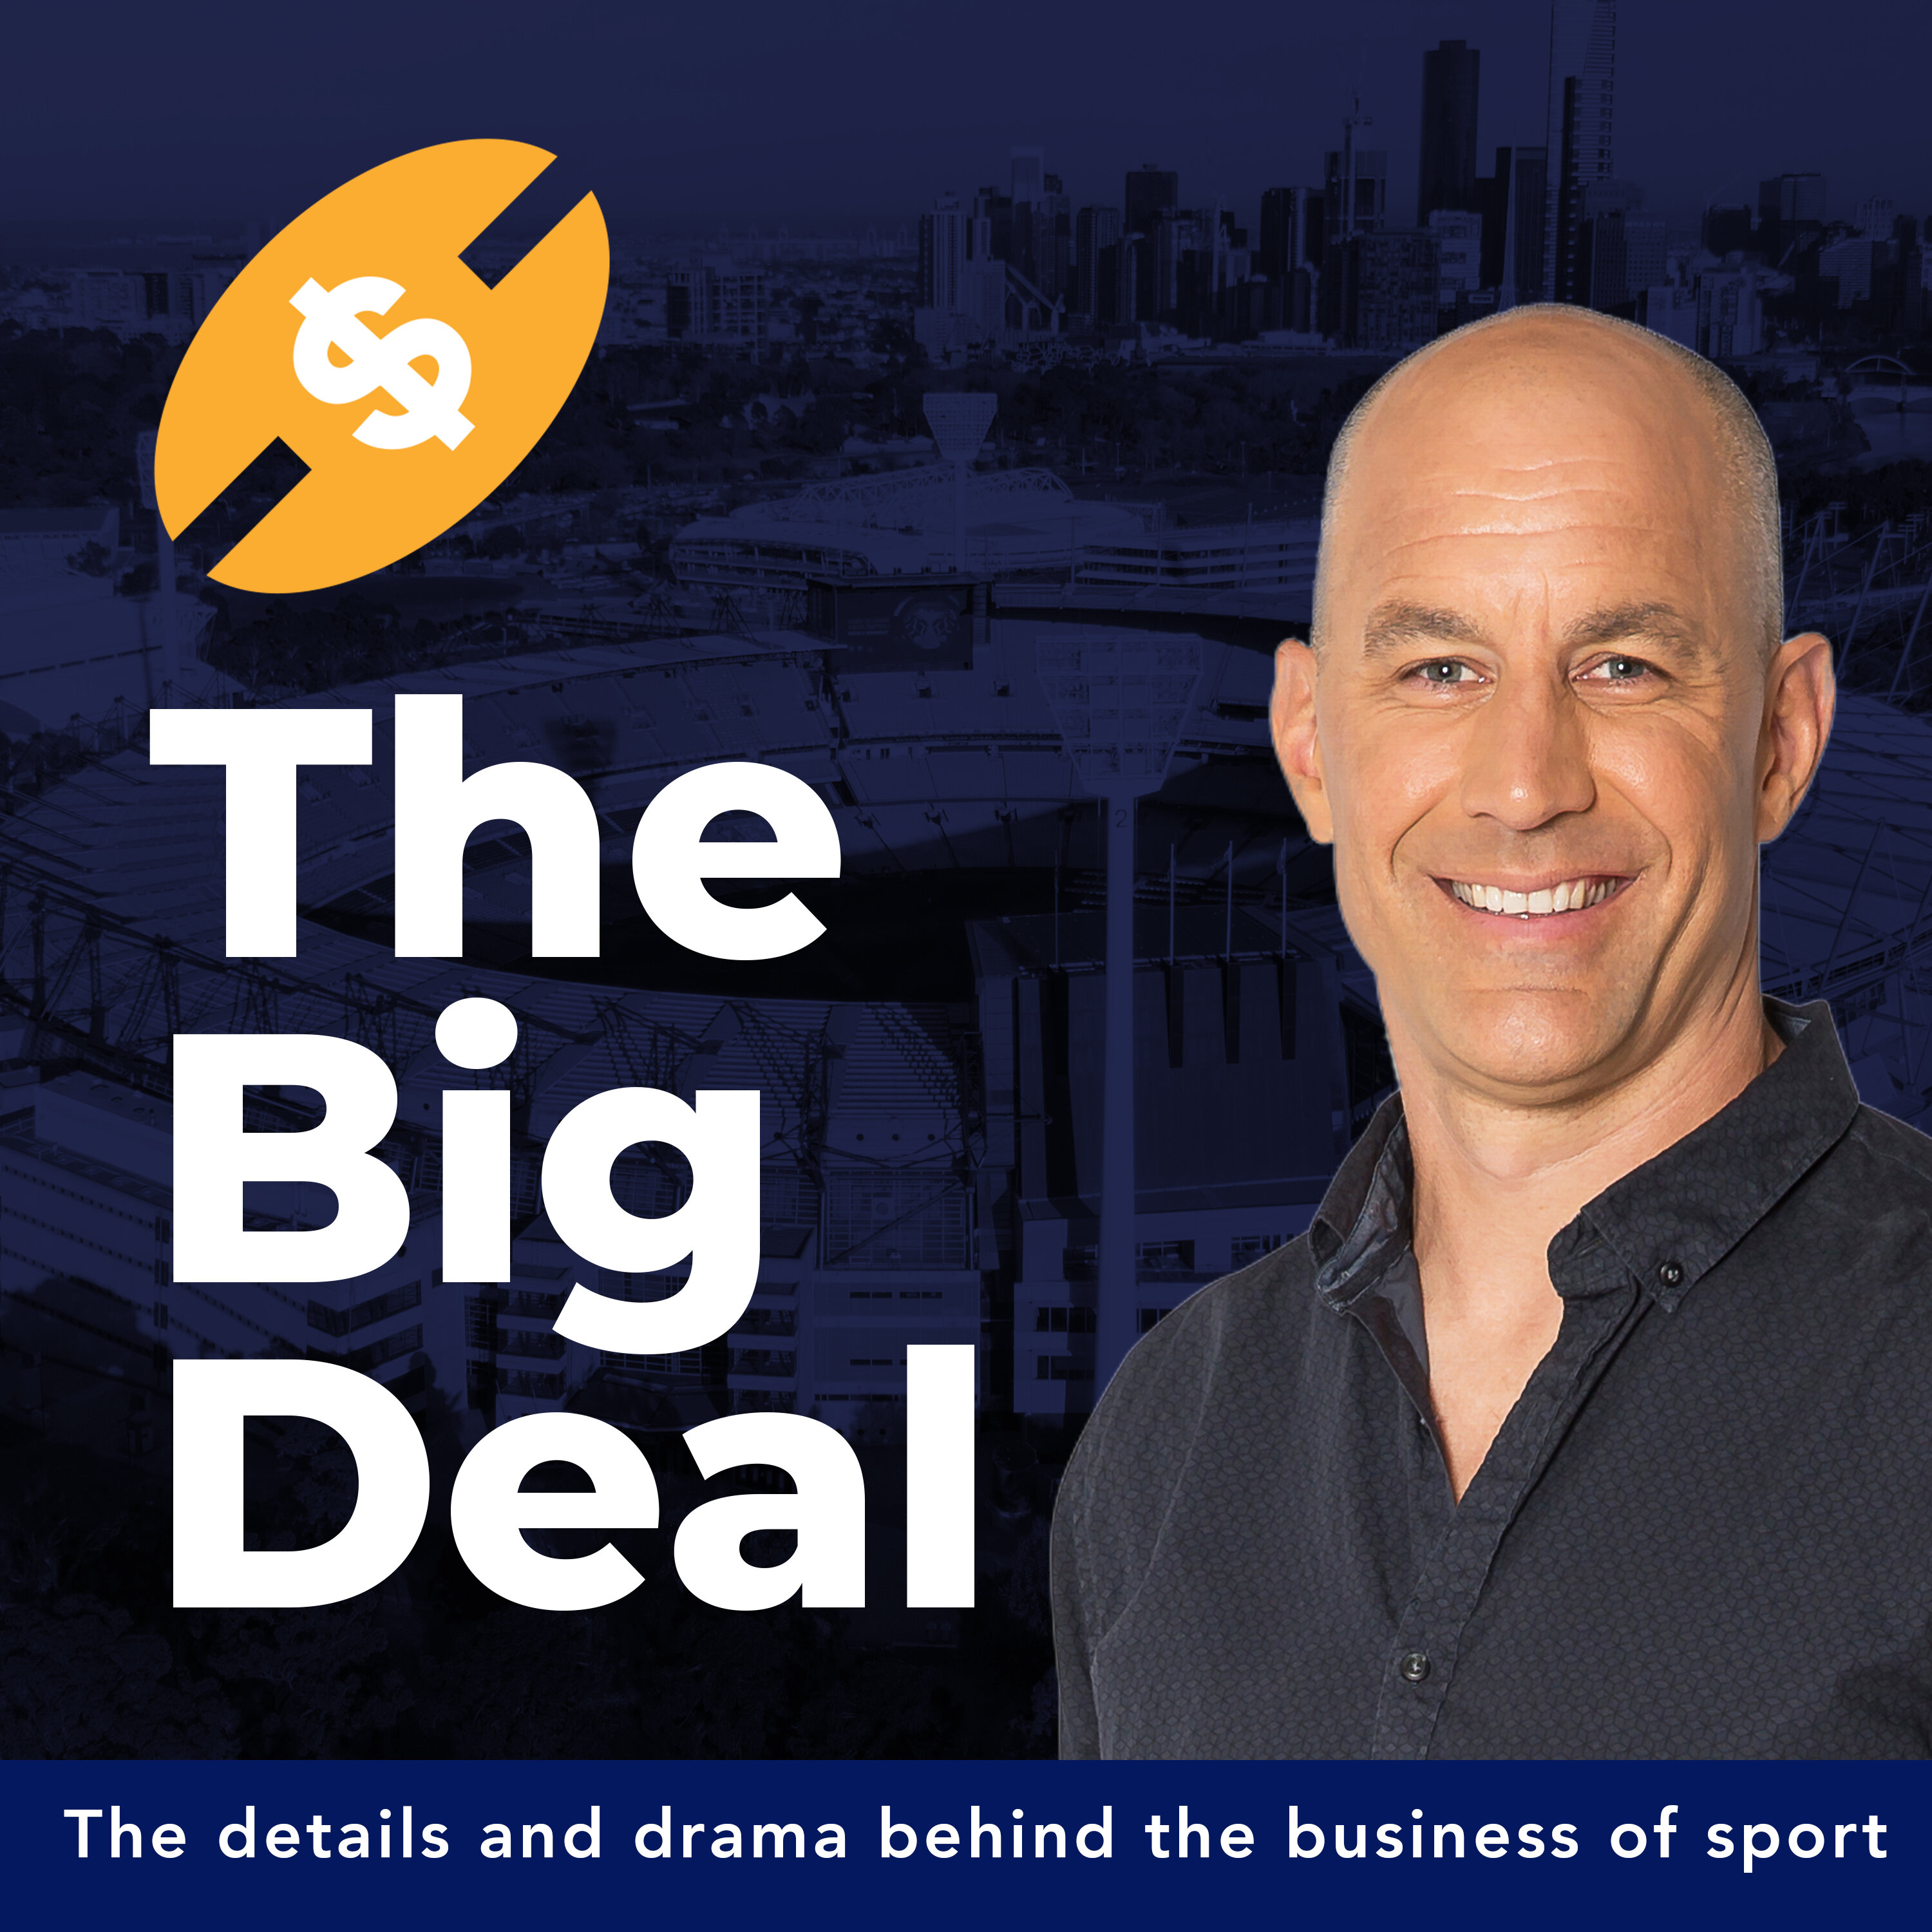 Sports Biz Wrap: Clubs back AFL over Tassie stadium, AFLW players caught in 'conduct unbecoming', Warner knocked by The Hundred, prices of Global Football Week revealed, Leichhardt Oval future in doubt, inside NBL free agency, Nike's German pull & more